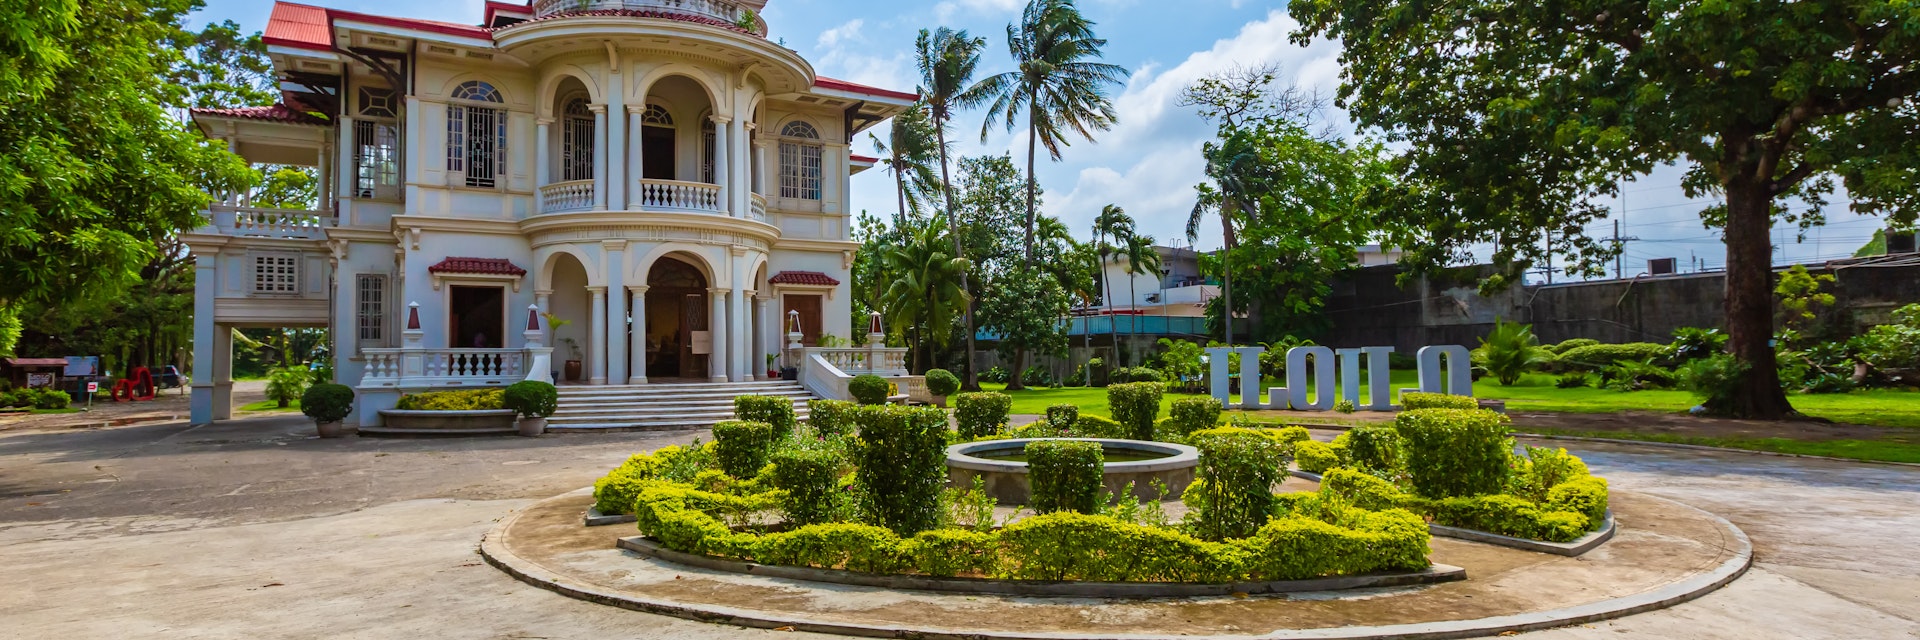 Iloilo, Philippines - 9 Aug 2019: Molo Mansion was built in 1926 in Iloilo Province of the Philippines. It is a residential turned museum and is defined by its American Colonial architecture.